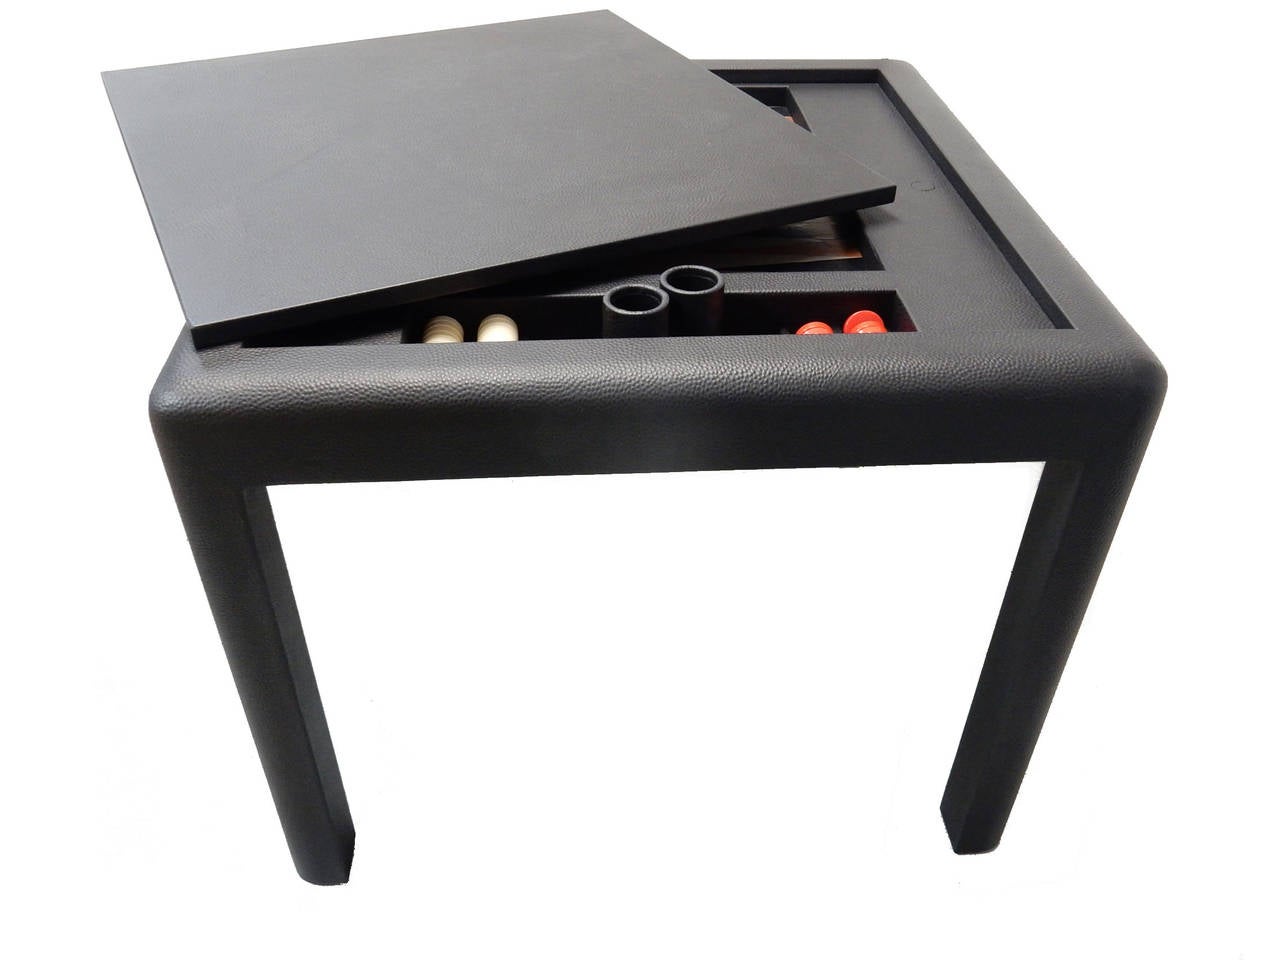 A beautiful games table by Karl Springer. Ostrich leather in a dark almost black charcoal color. Simple elegant and timeless design. Signed and dated.